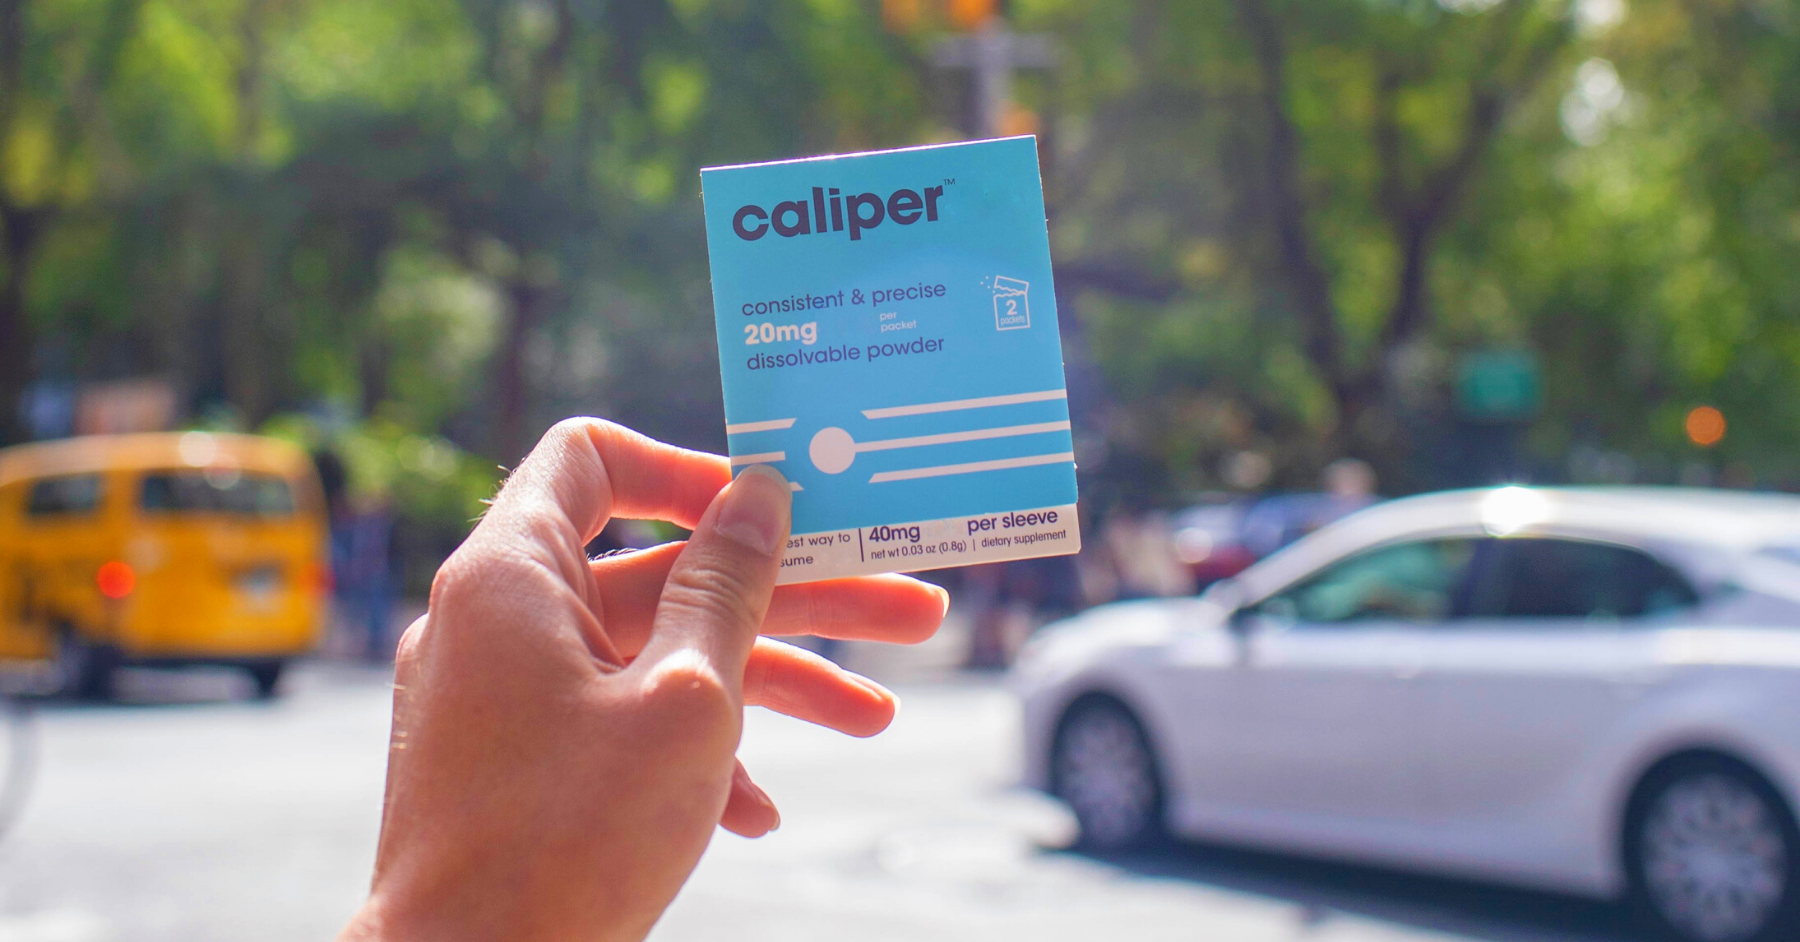 hand holds a blue package that says "caliper' in front of a blurred city street